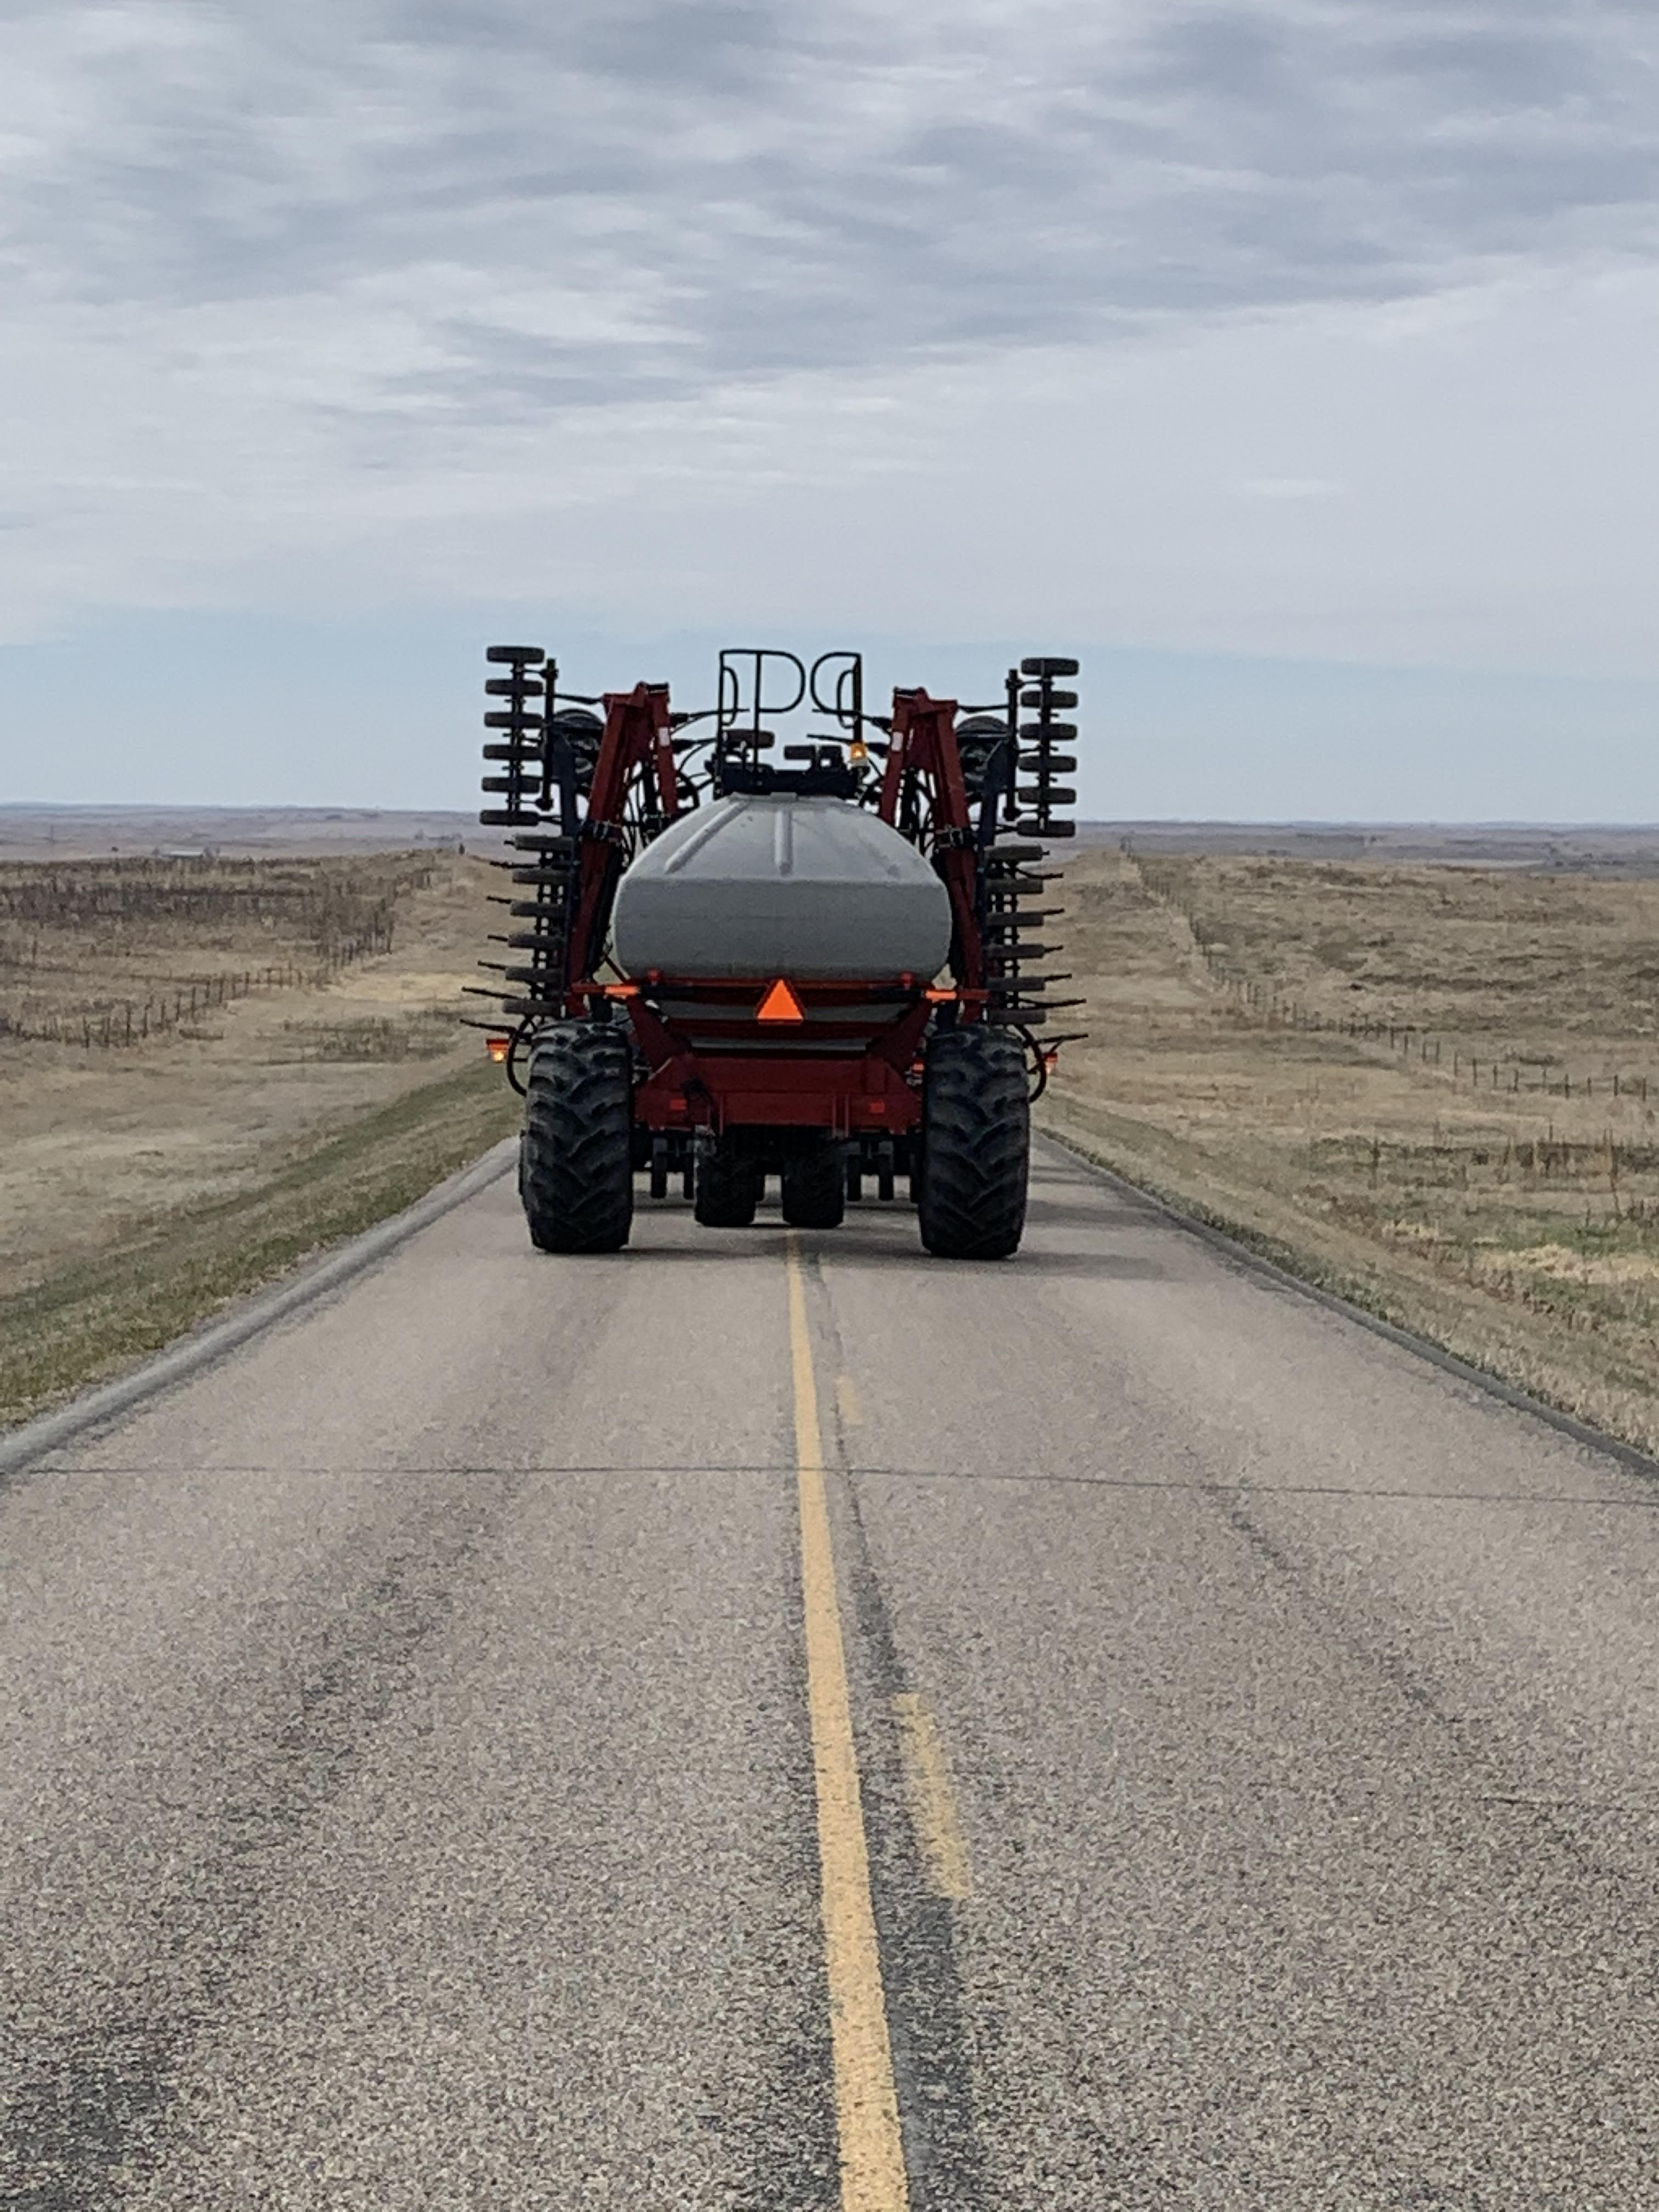 Morning Ag News, August 31, 2021: Labor shortage creating extra stress on farms and ranches